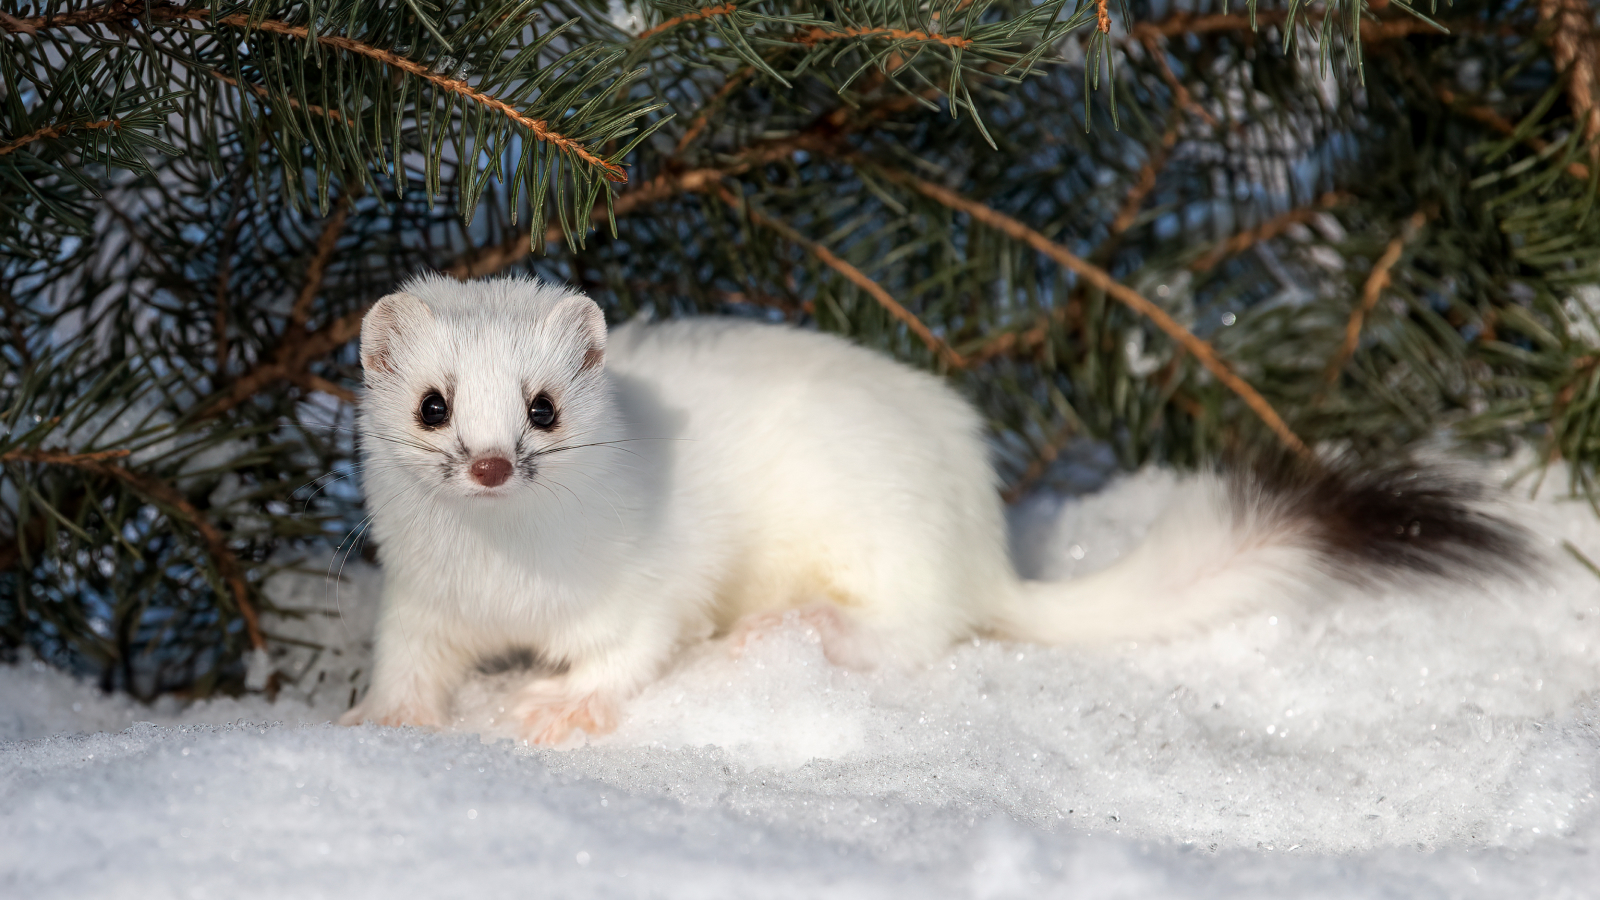 A white ermine weasel staring into the camera laying on the snow in front of a shrub